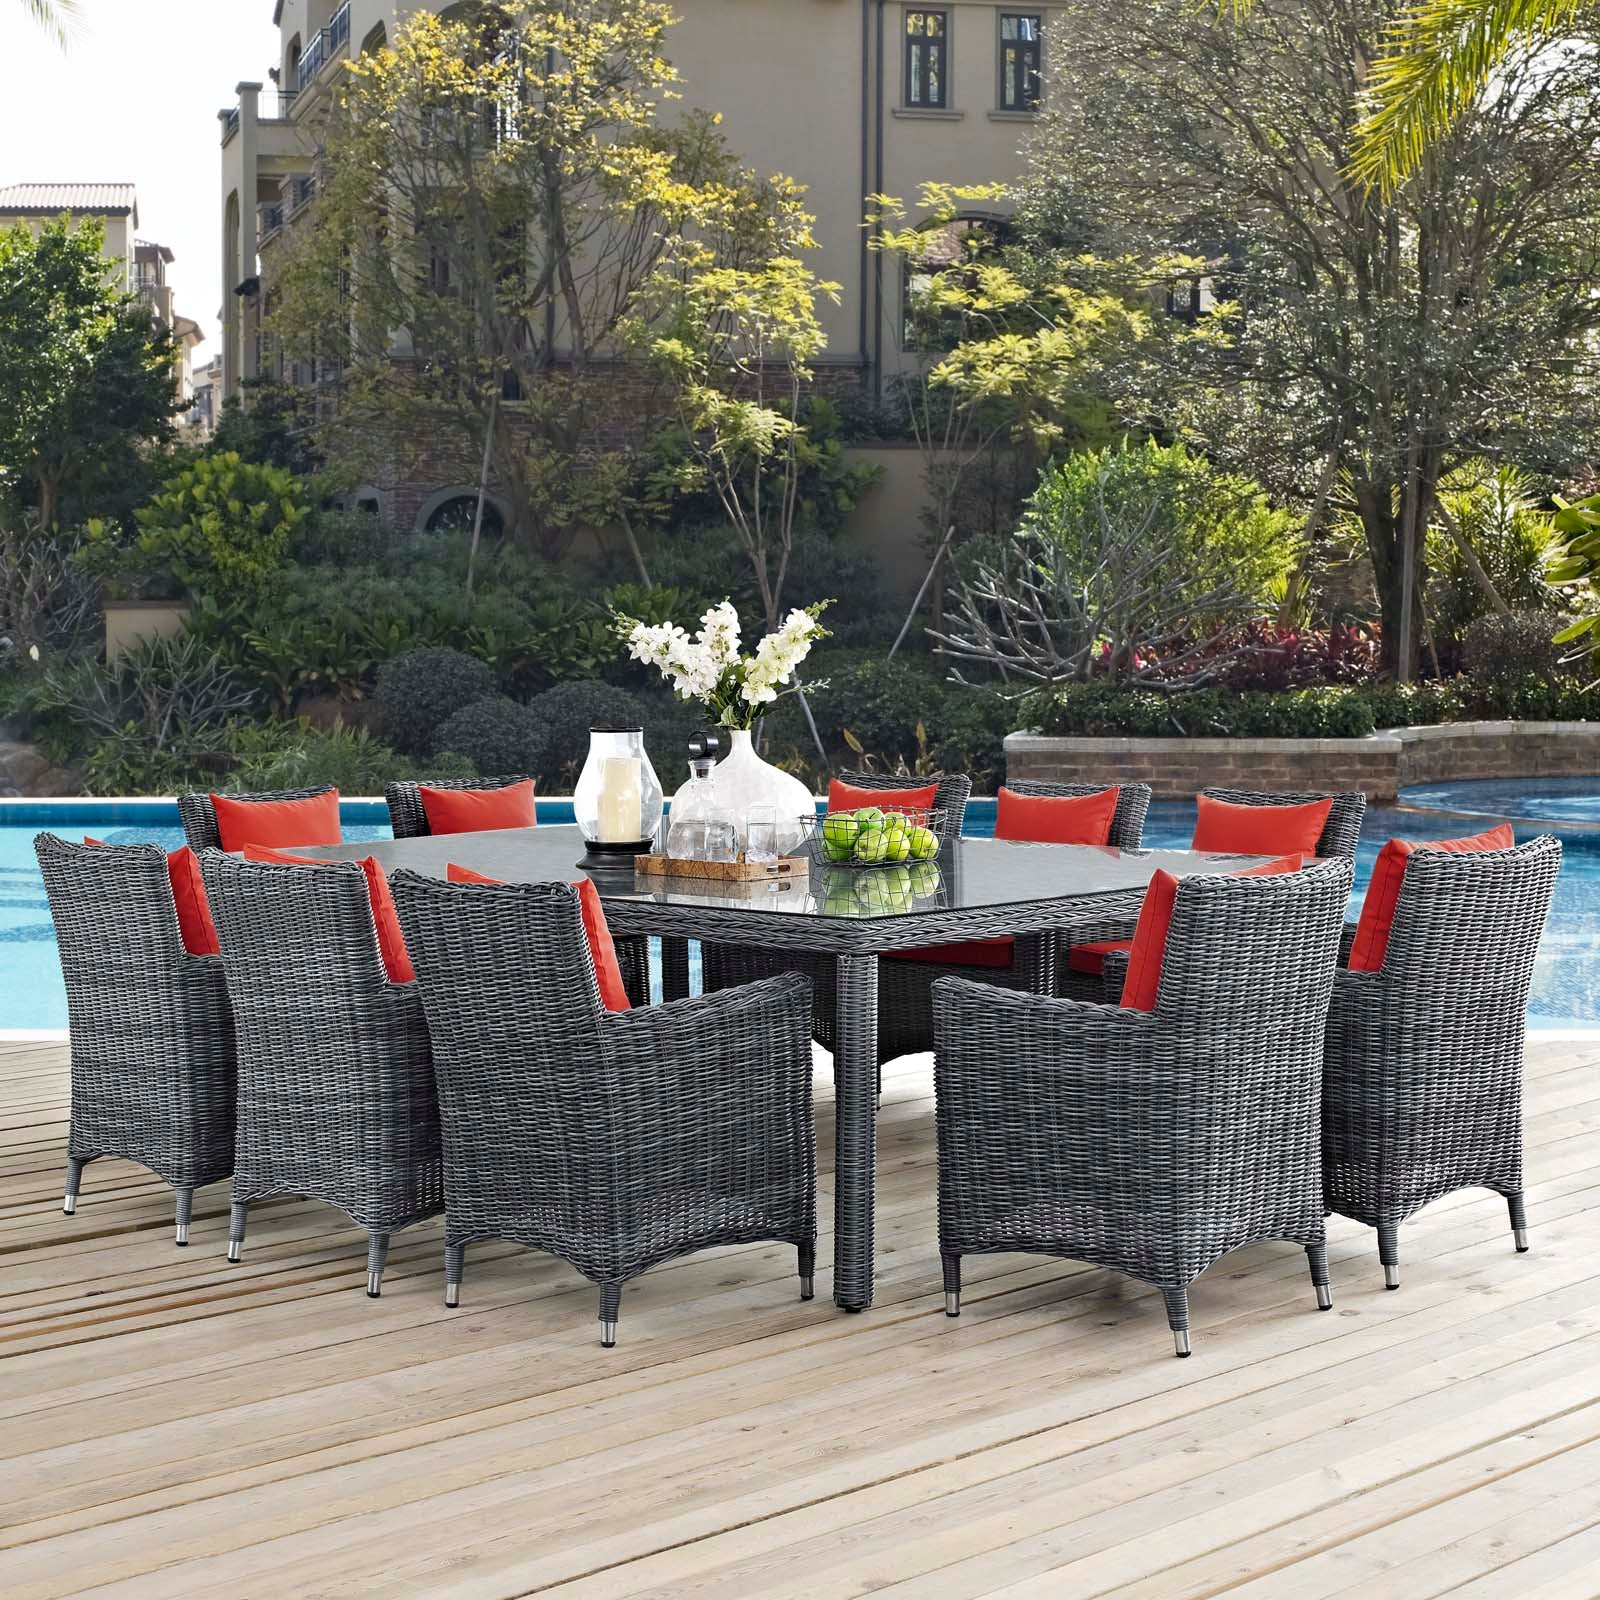 Modway Outdoor Dining Sets - Summon 11 Piece Outdoor Patio Sunbrella Dining Set Canvas Red